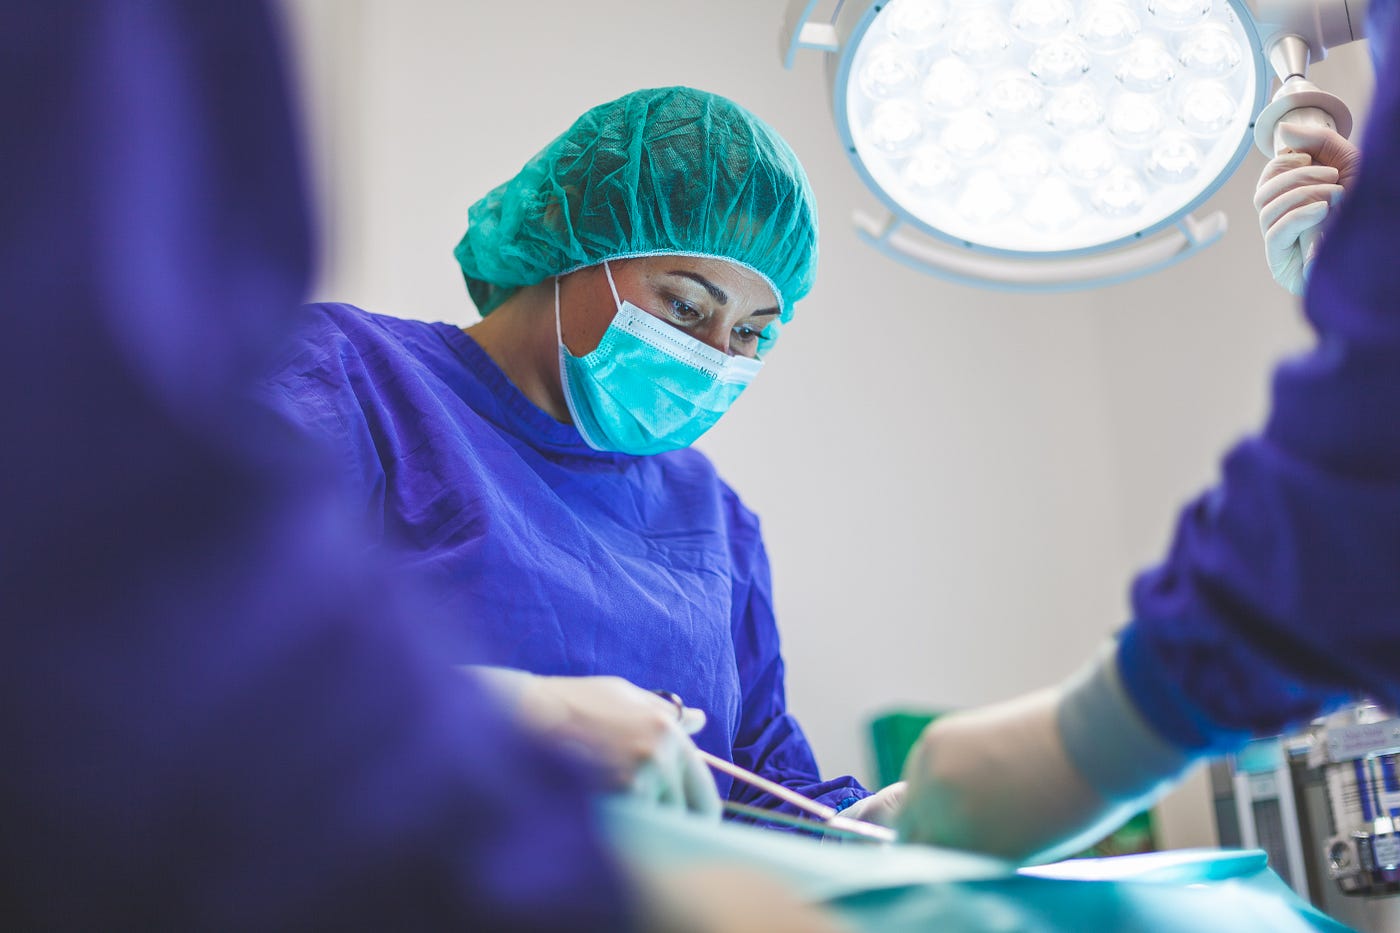 A female surgeon works in the operating room. She dons a green face mask and a green hair covering. New research suggests hospital-provided single-use undergarments improve the patient experience and satisfaction.